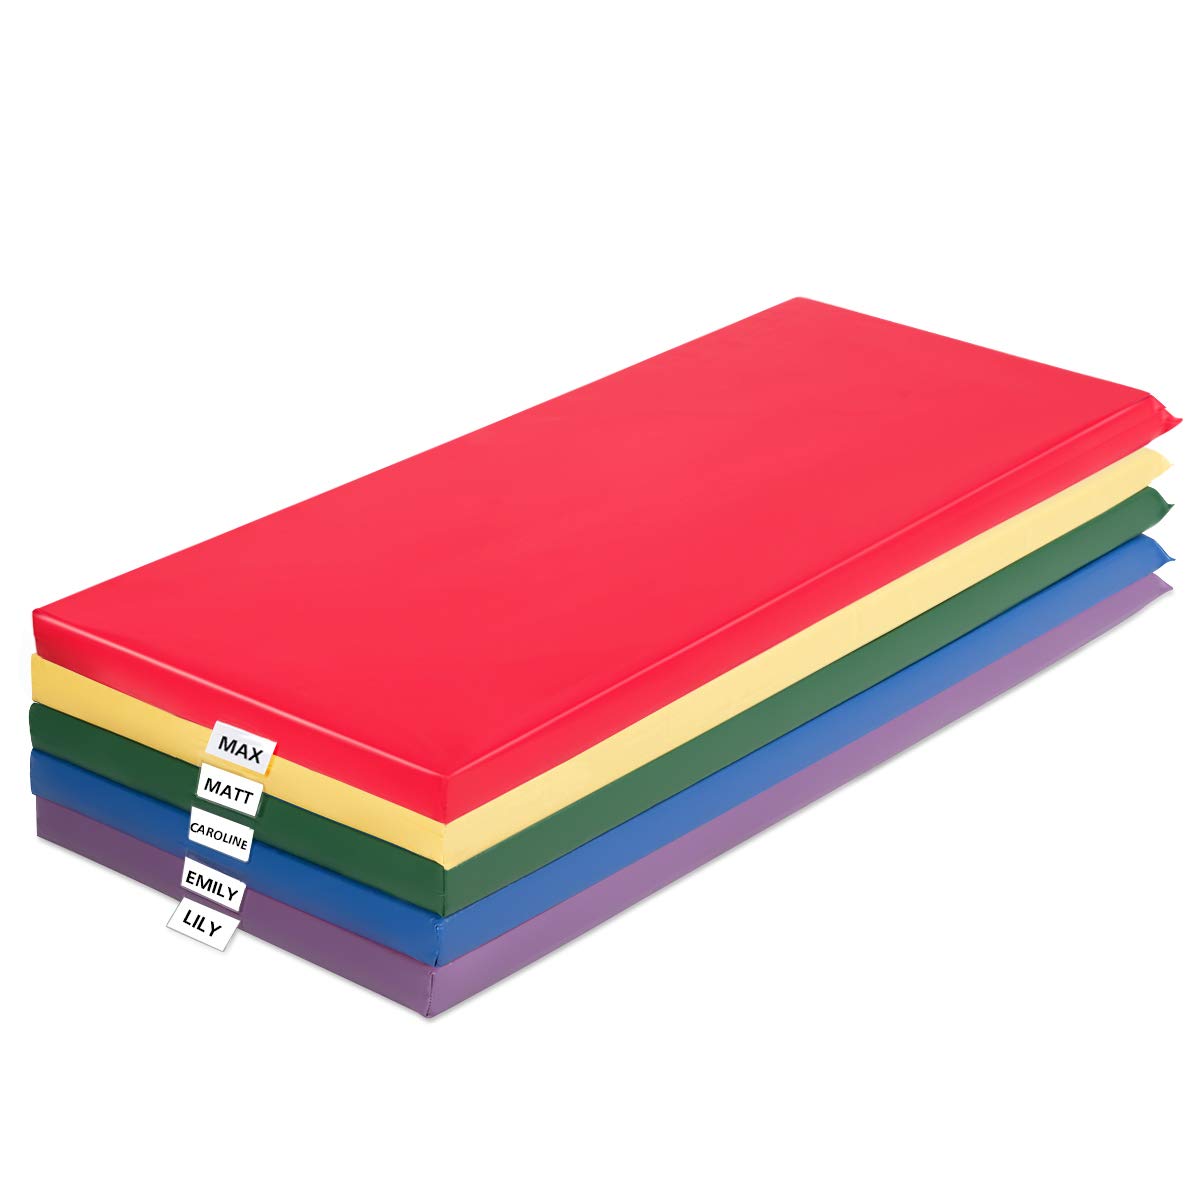 Deluxe Rest Mat - 2 Thick